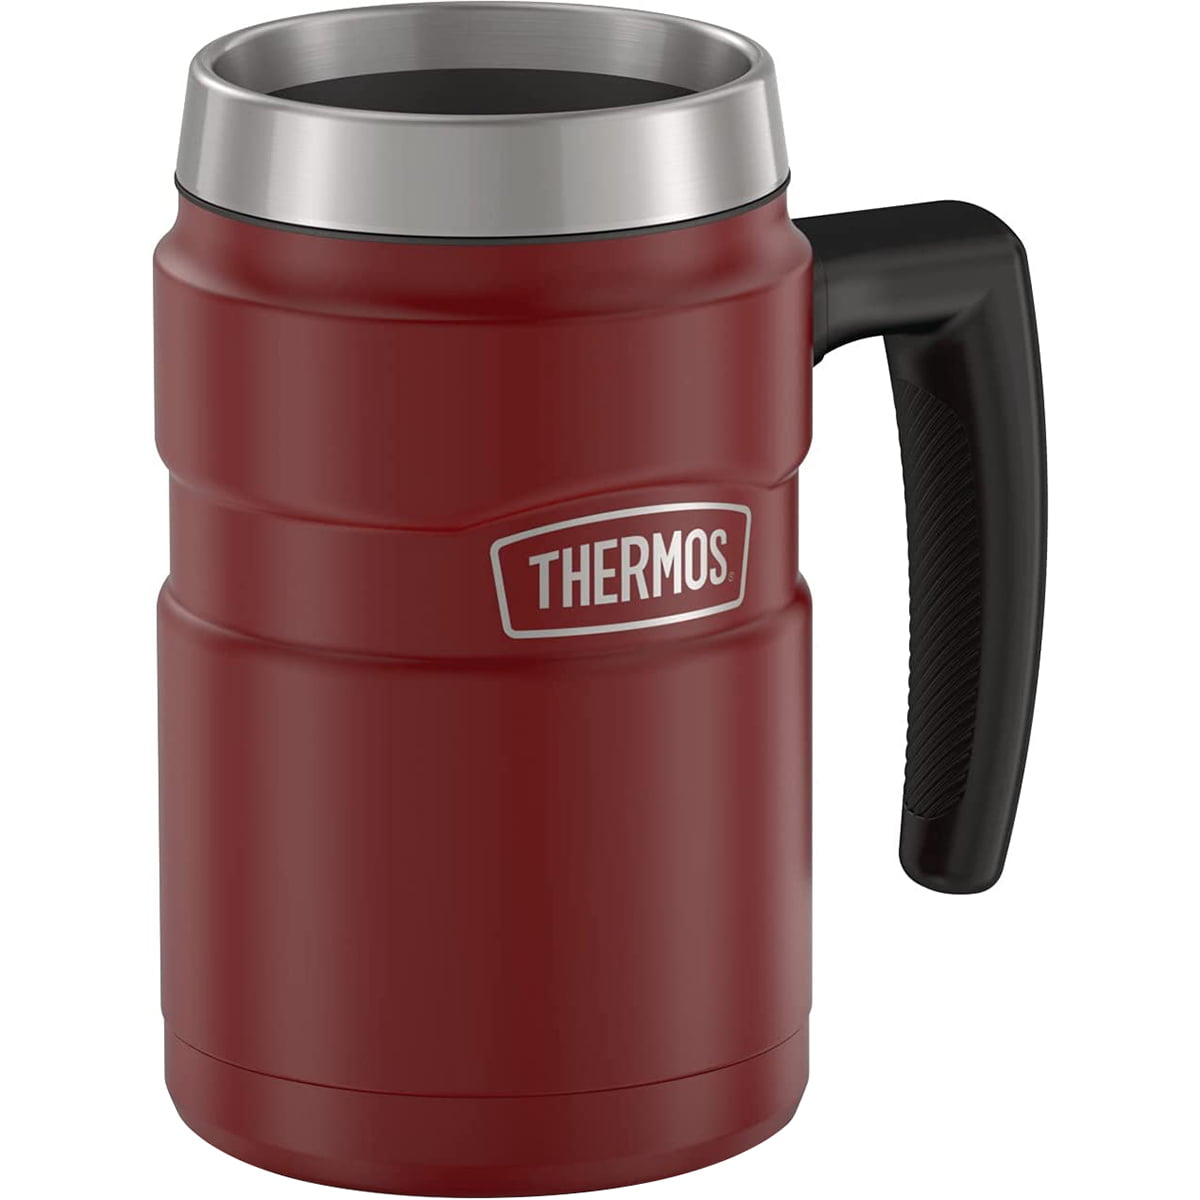  THERMOS Stainless King Vacuum-Insulated Travel Mug, 16 Ounce,  Rustic Red : Home & Kitchen